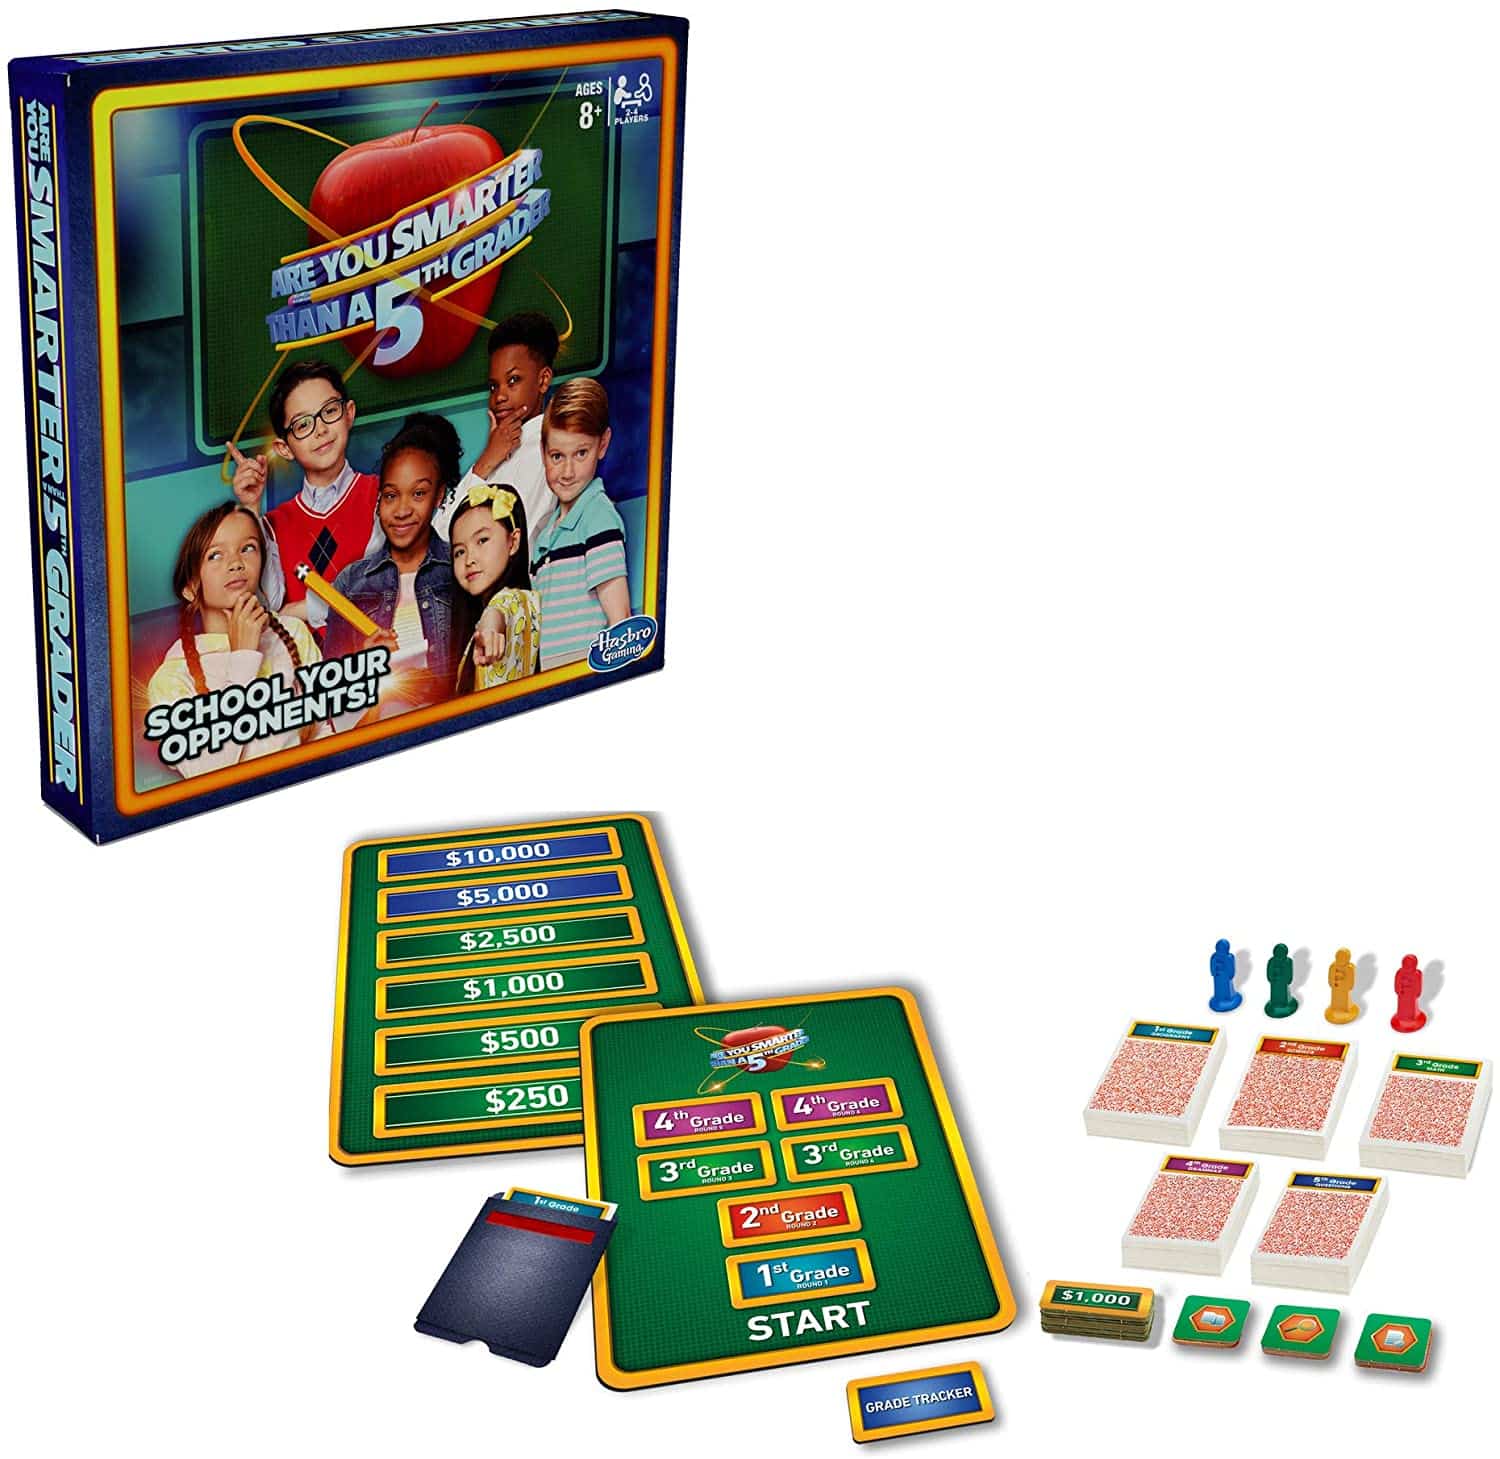 DEAL ALERT: 50% off Are You Smarter Than a 5th Grader Board Game